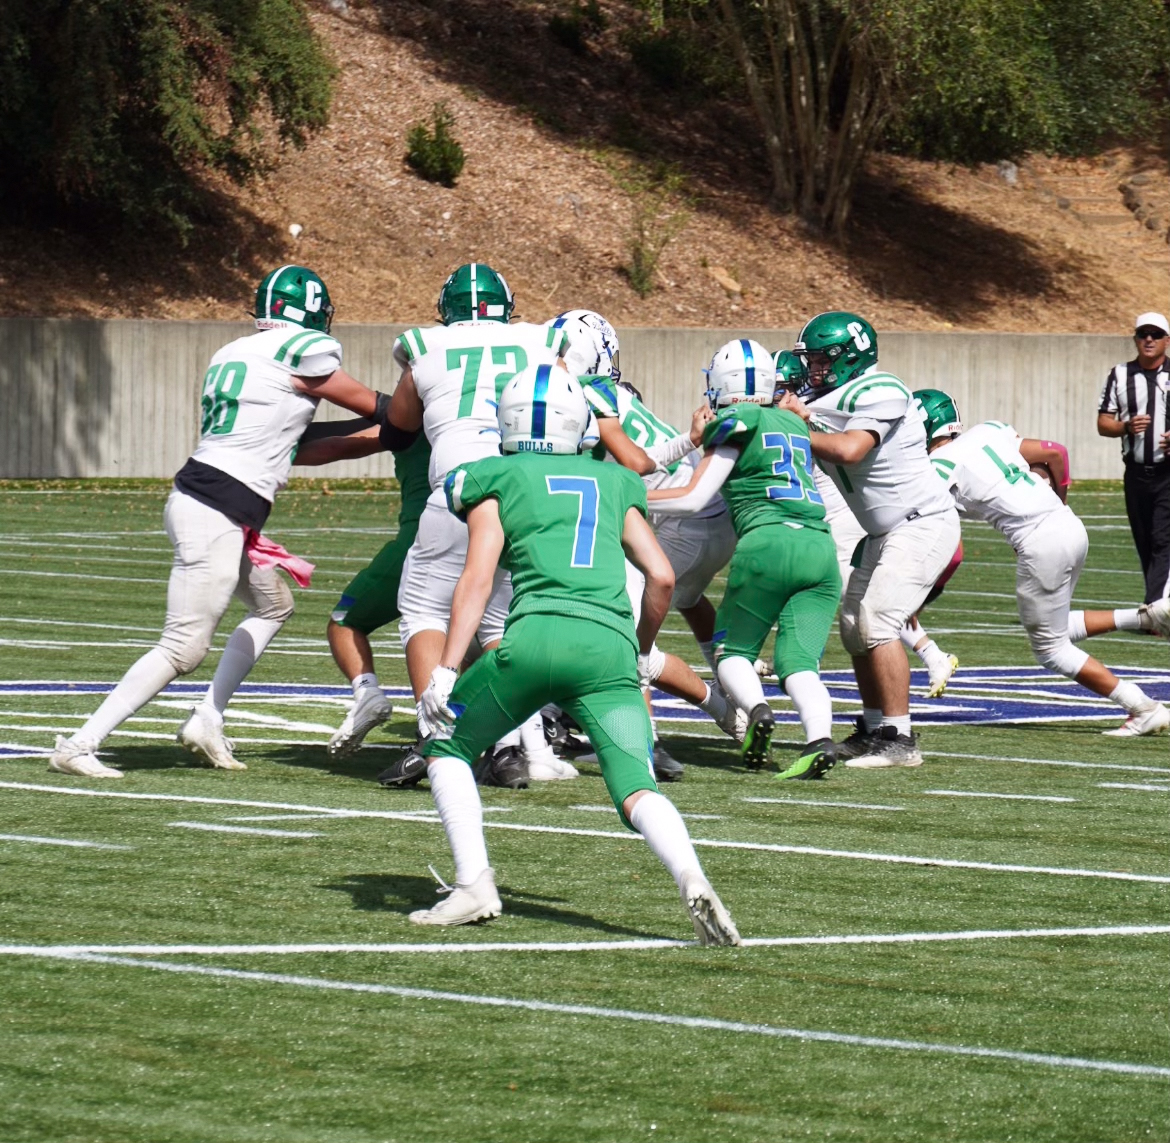 Andrew Murr gets ready to make a play against the run. The Bulls stifled Calistogas run game on Sept. 30.